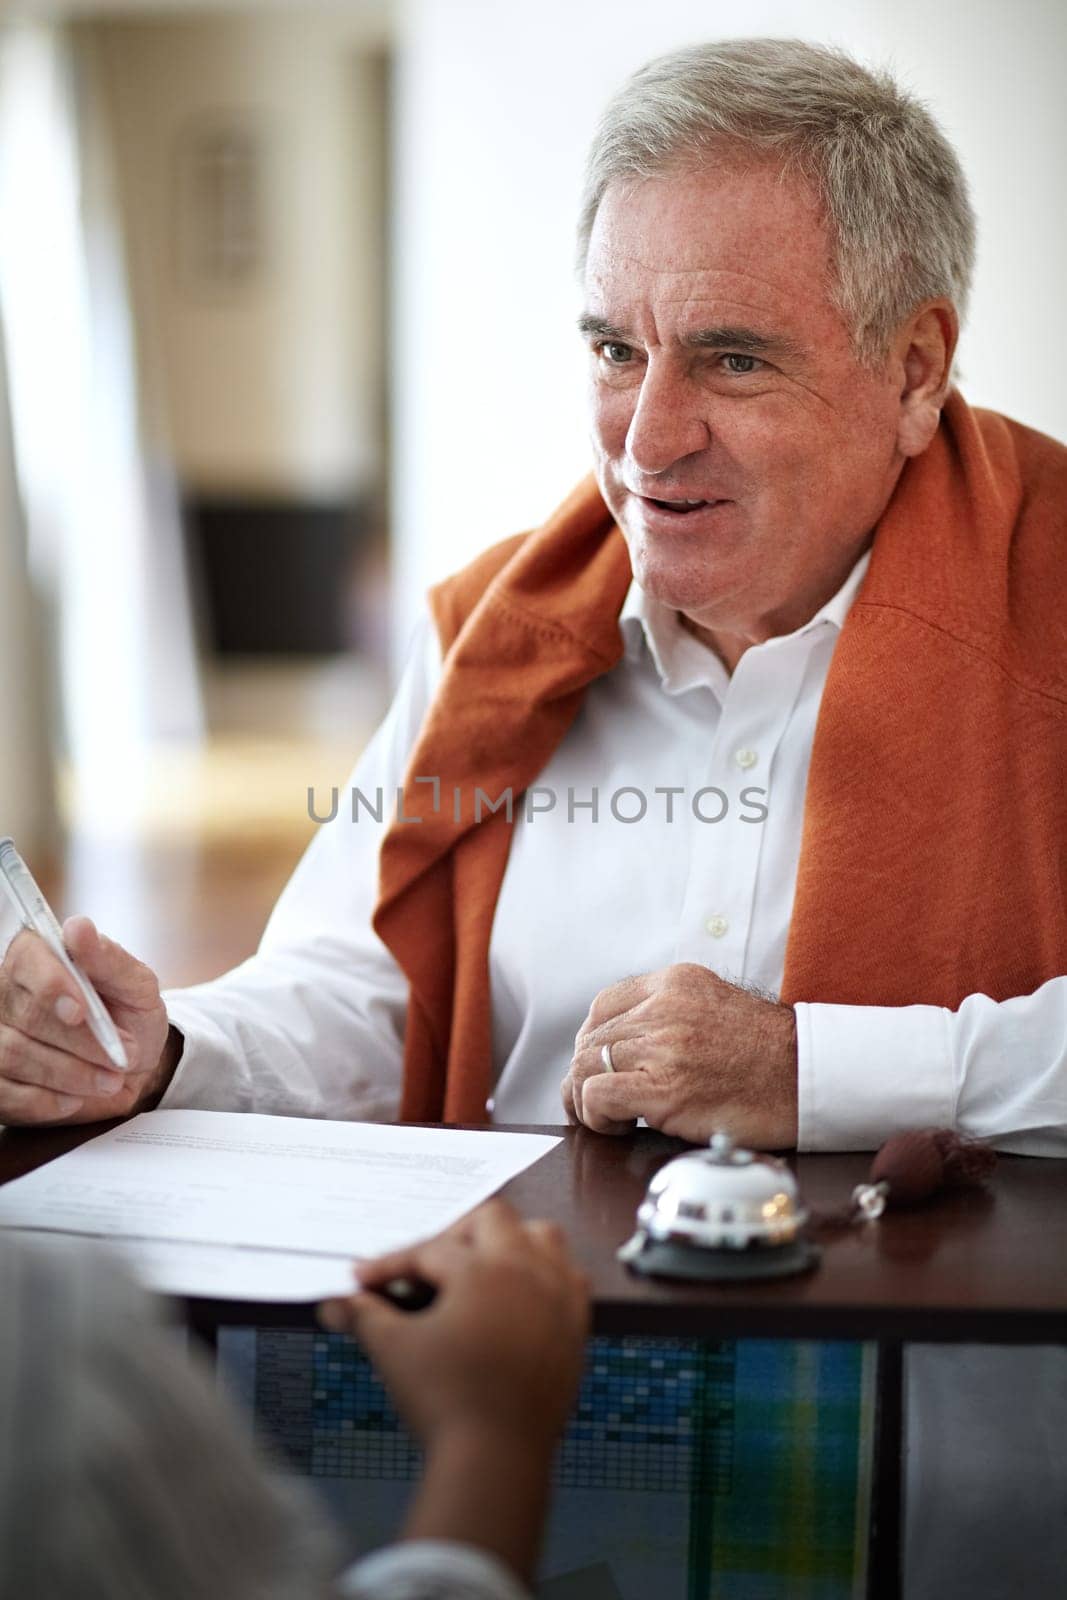 Hotel, reception and an old man signing documents for check in at a luxury hospitality resort for vacation. Paper, signature and travel with a happy senior male tourist in a lodge for holiday travel.